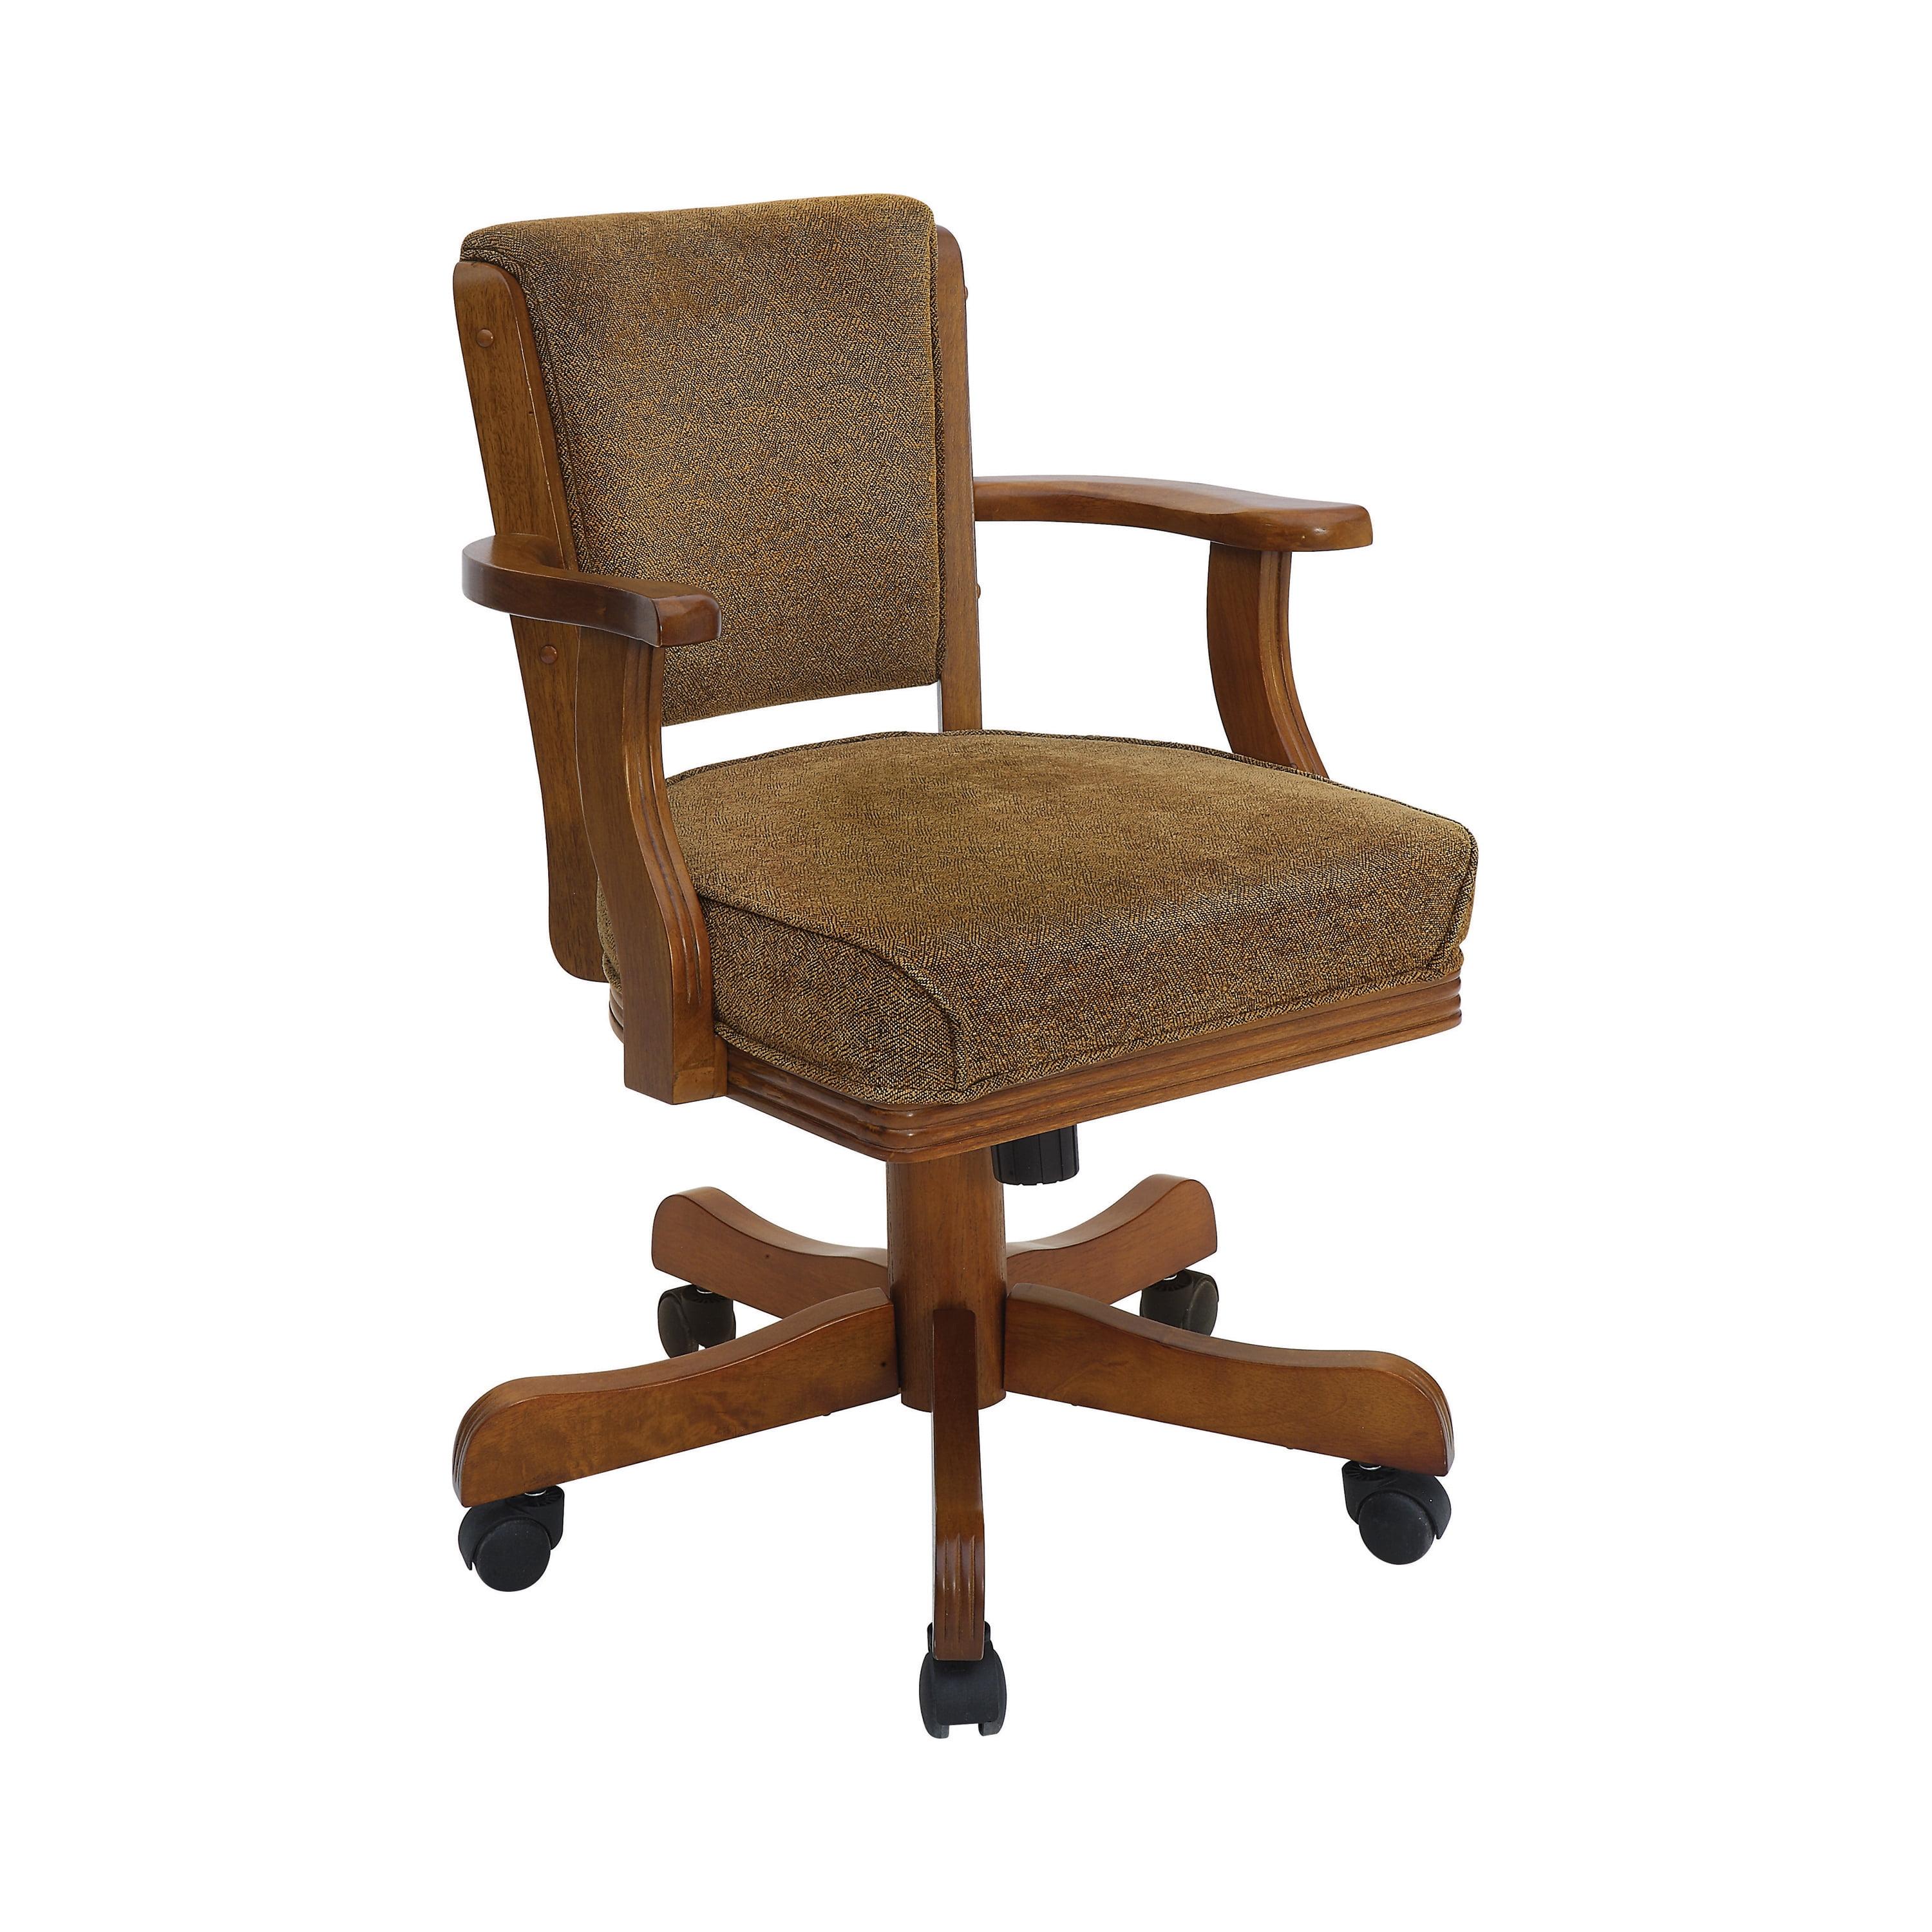 Mitchell 33" Olive-Brown Upholstered Game Chair with Amber Wood Finish